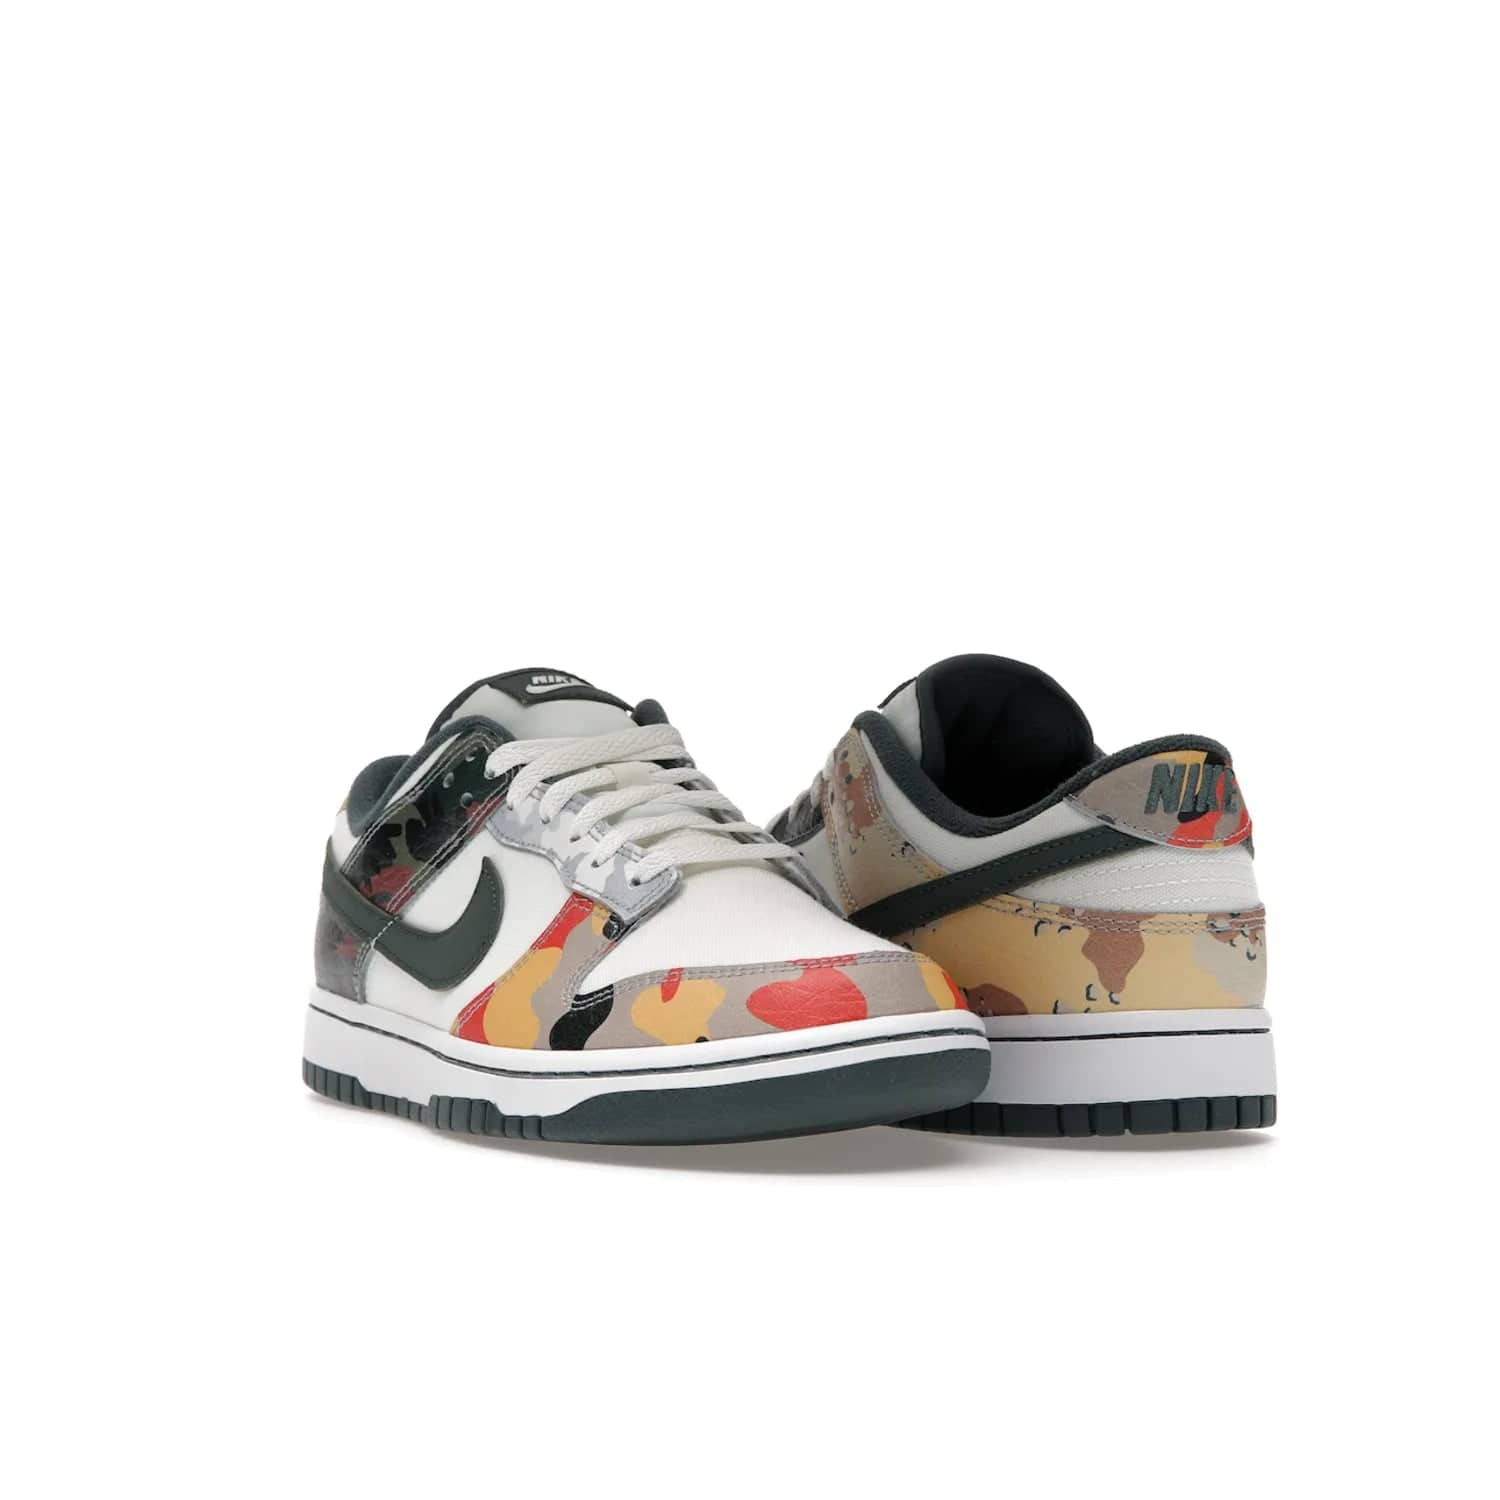 Nike Dunk Low SE Sail Multi-Camo - Image 7 - Only at www.BallersClubKickz.com - Classic design meets statement style in the Nike Dunk Low SE Sail Multi-Camo. White leather base with multi-color camo overlays, vibrant Nike Swooshes, and orange Nike embroidery. Get yours August 2021.